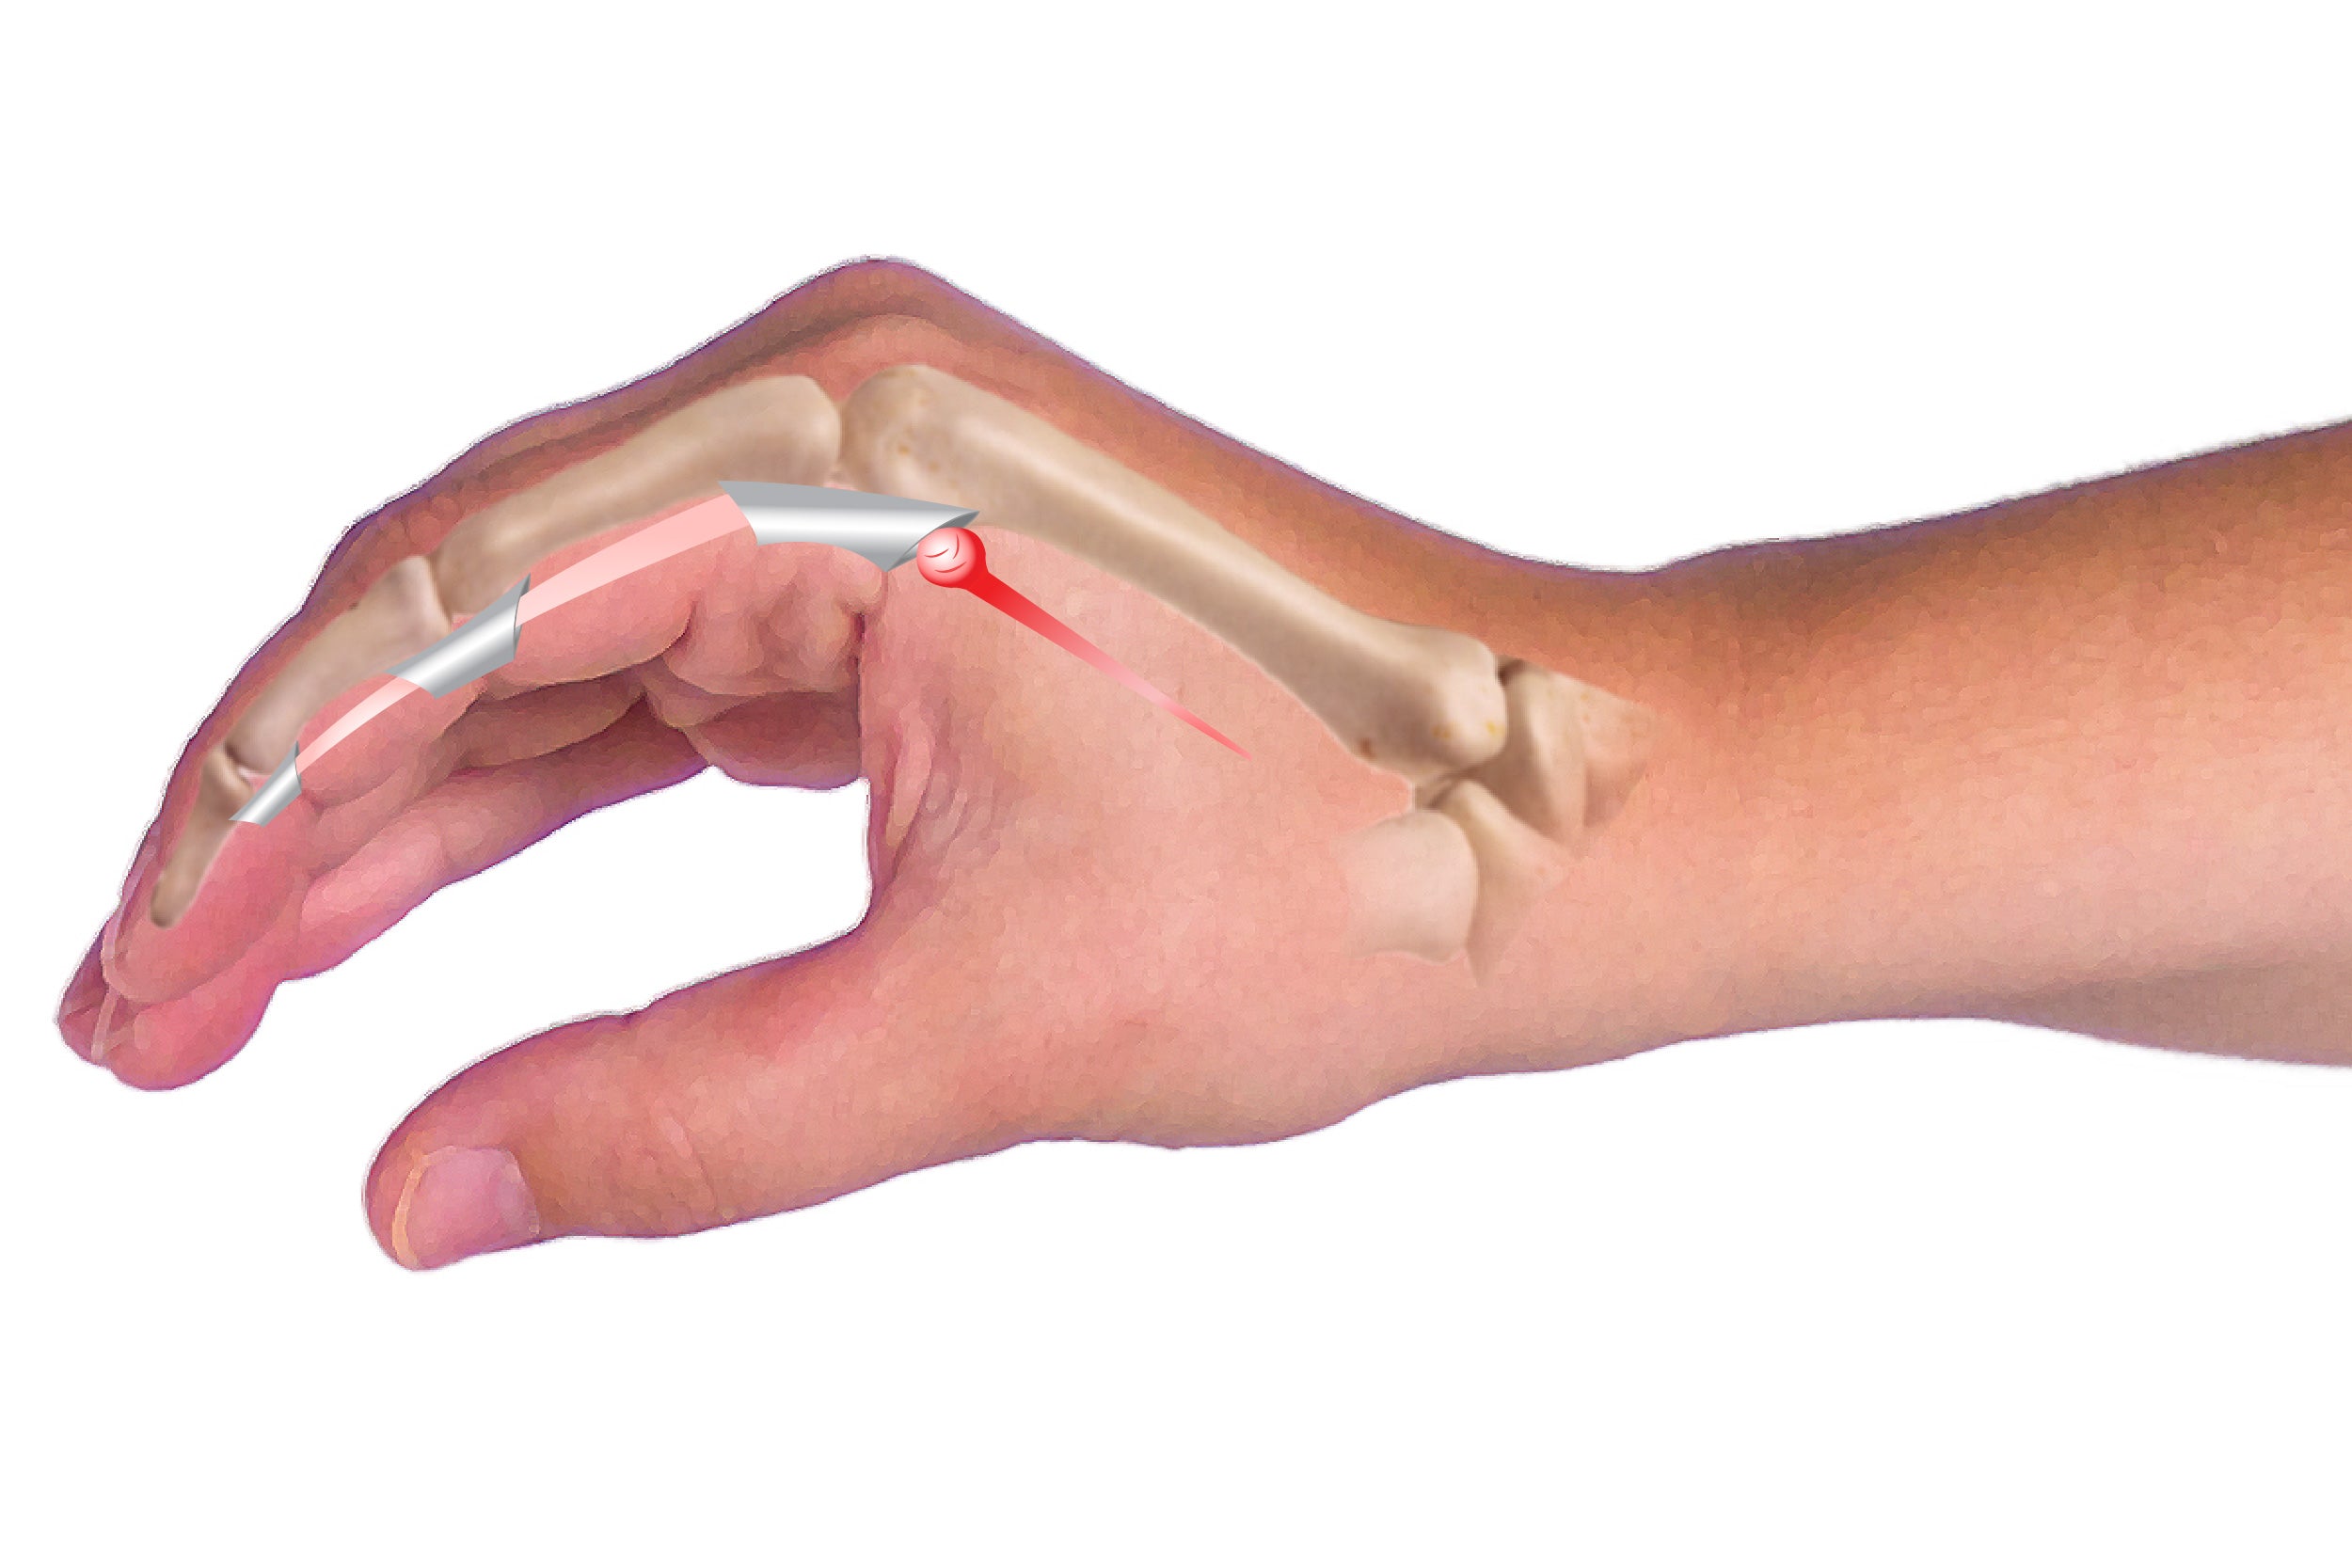 Trigger finger is caused by a tendon being pinched and causing your finger to stay pointed